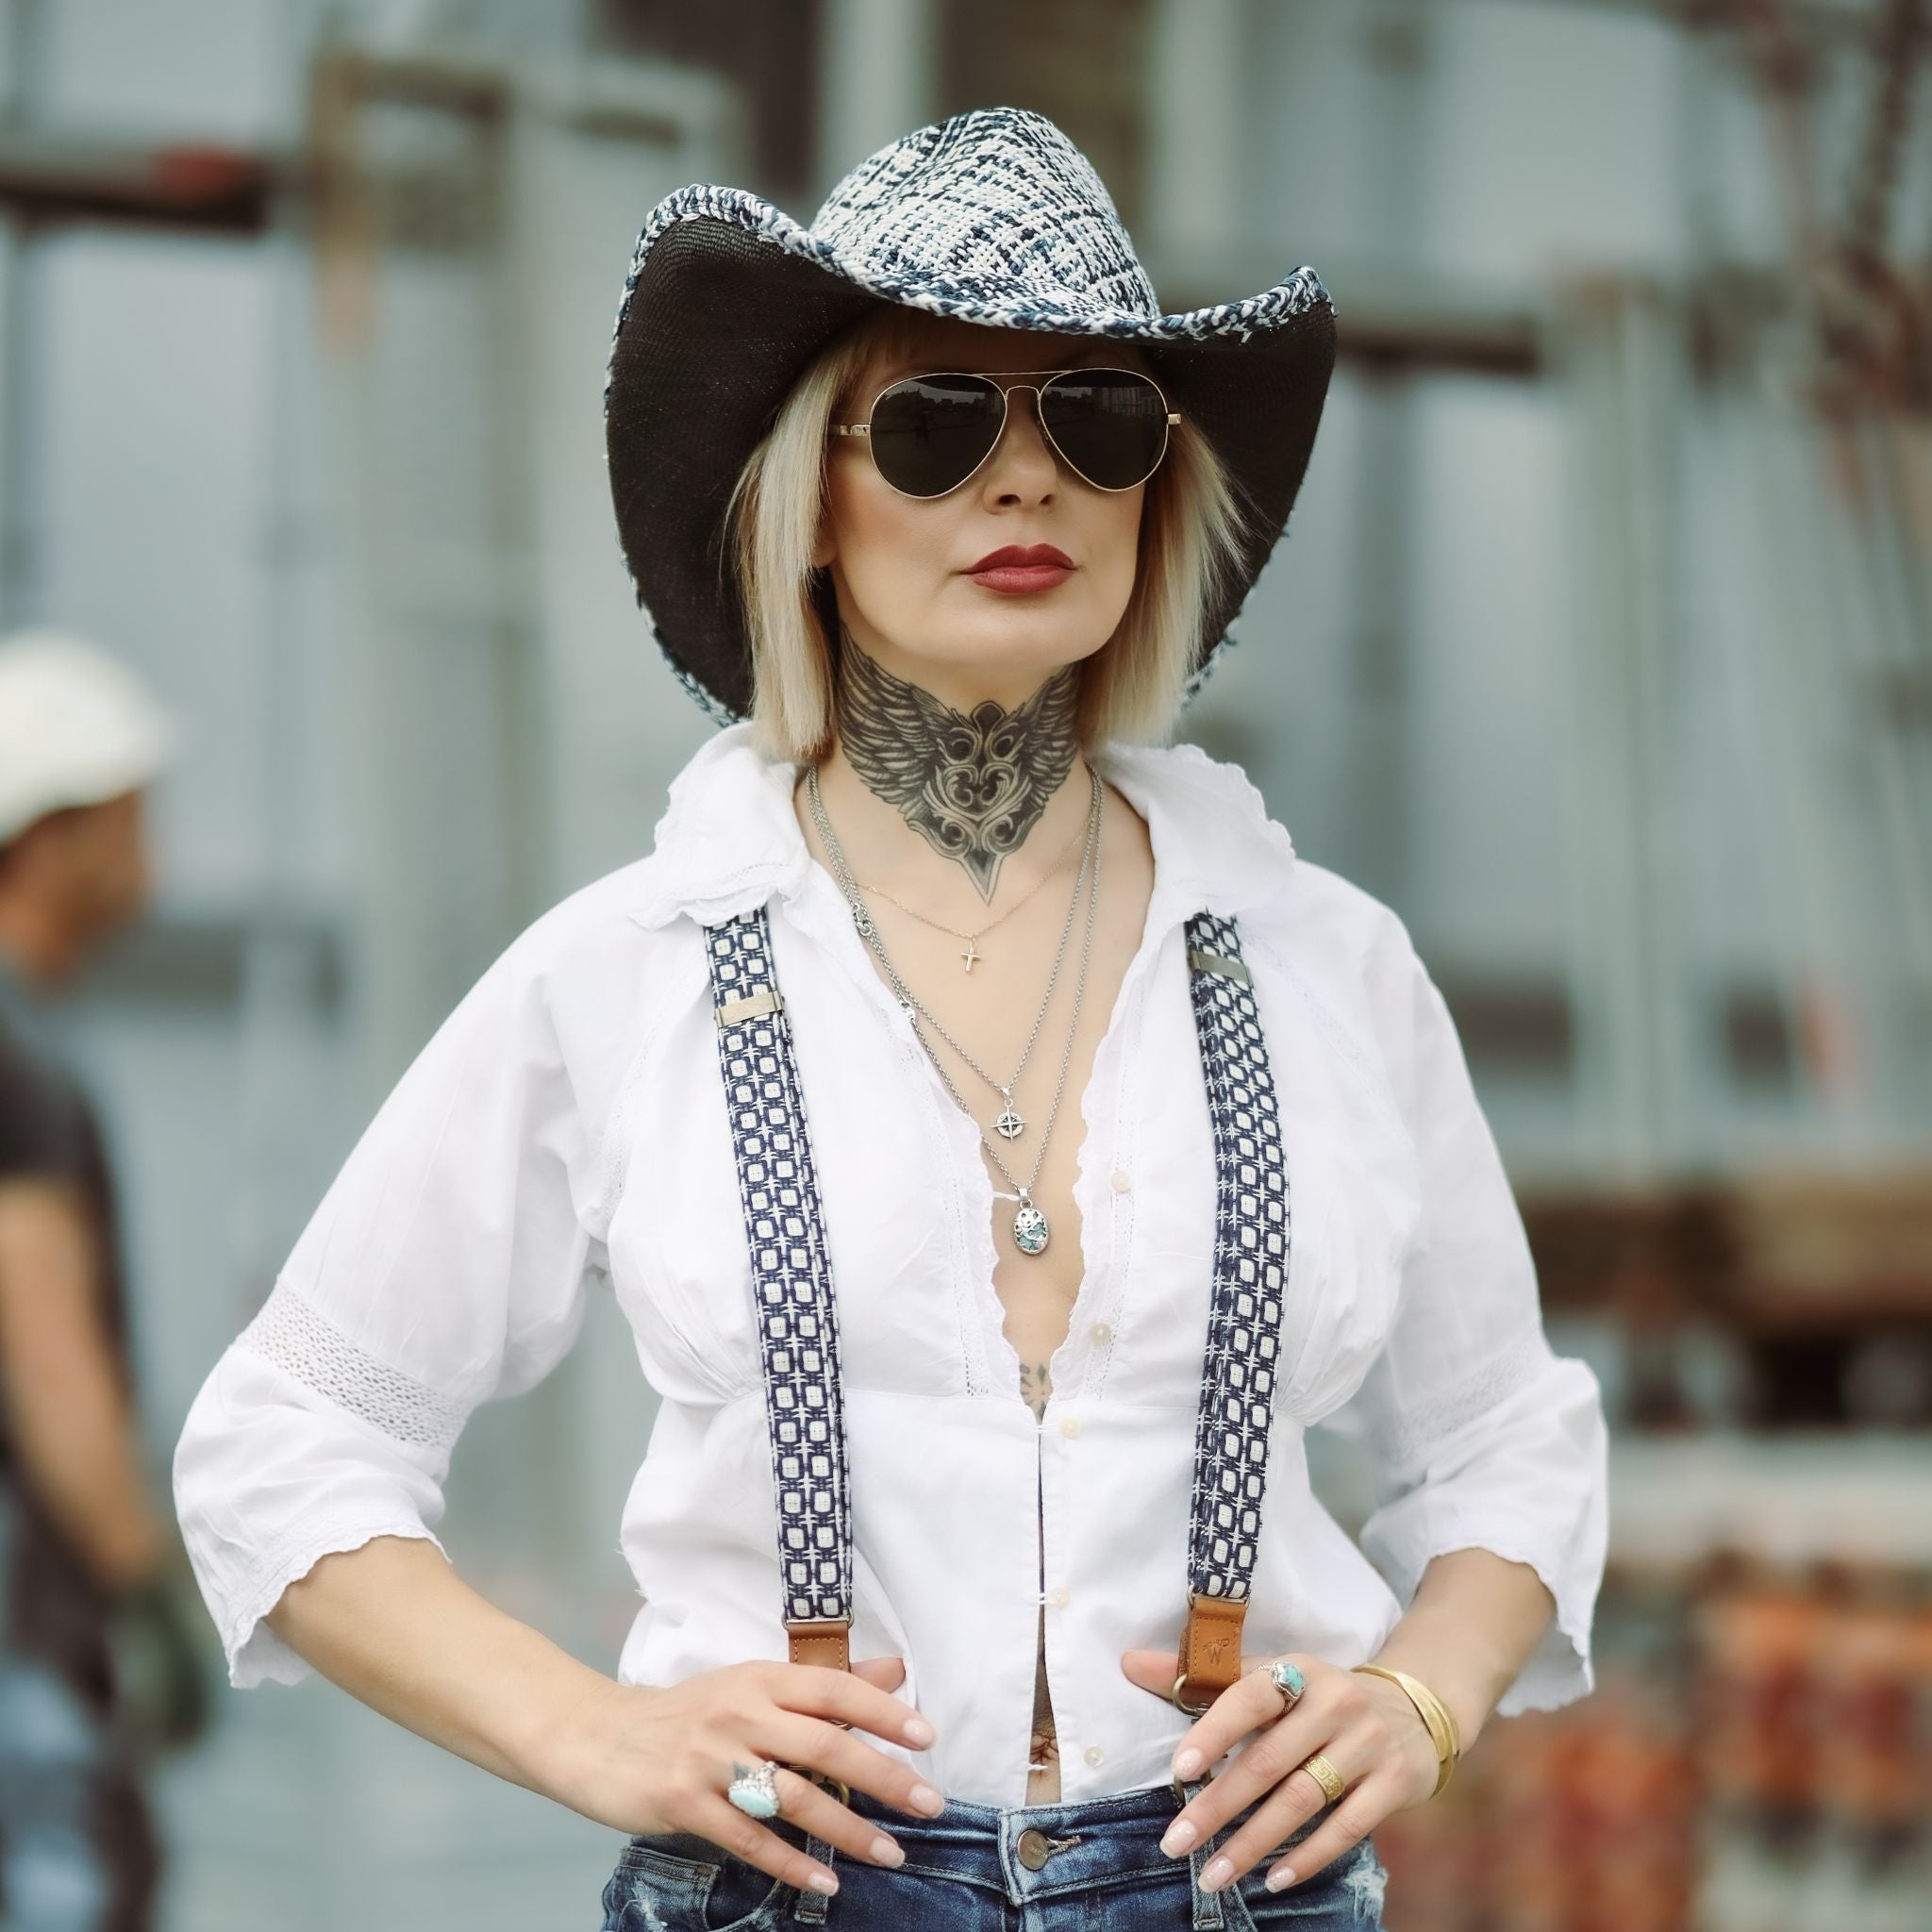 Woman wearing a blue and white cowboyhat and aviator sunglasses. She is wearing a white blouse and blue and white Suspenders. 